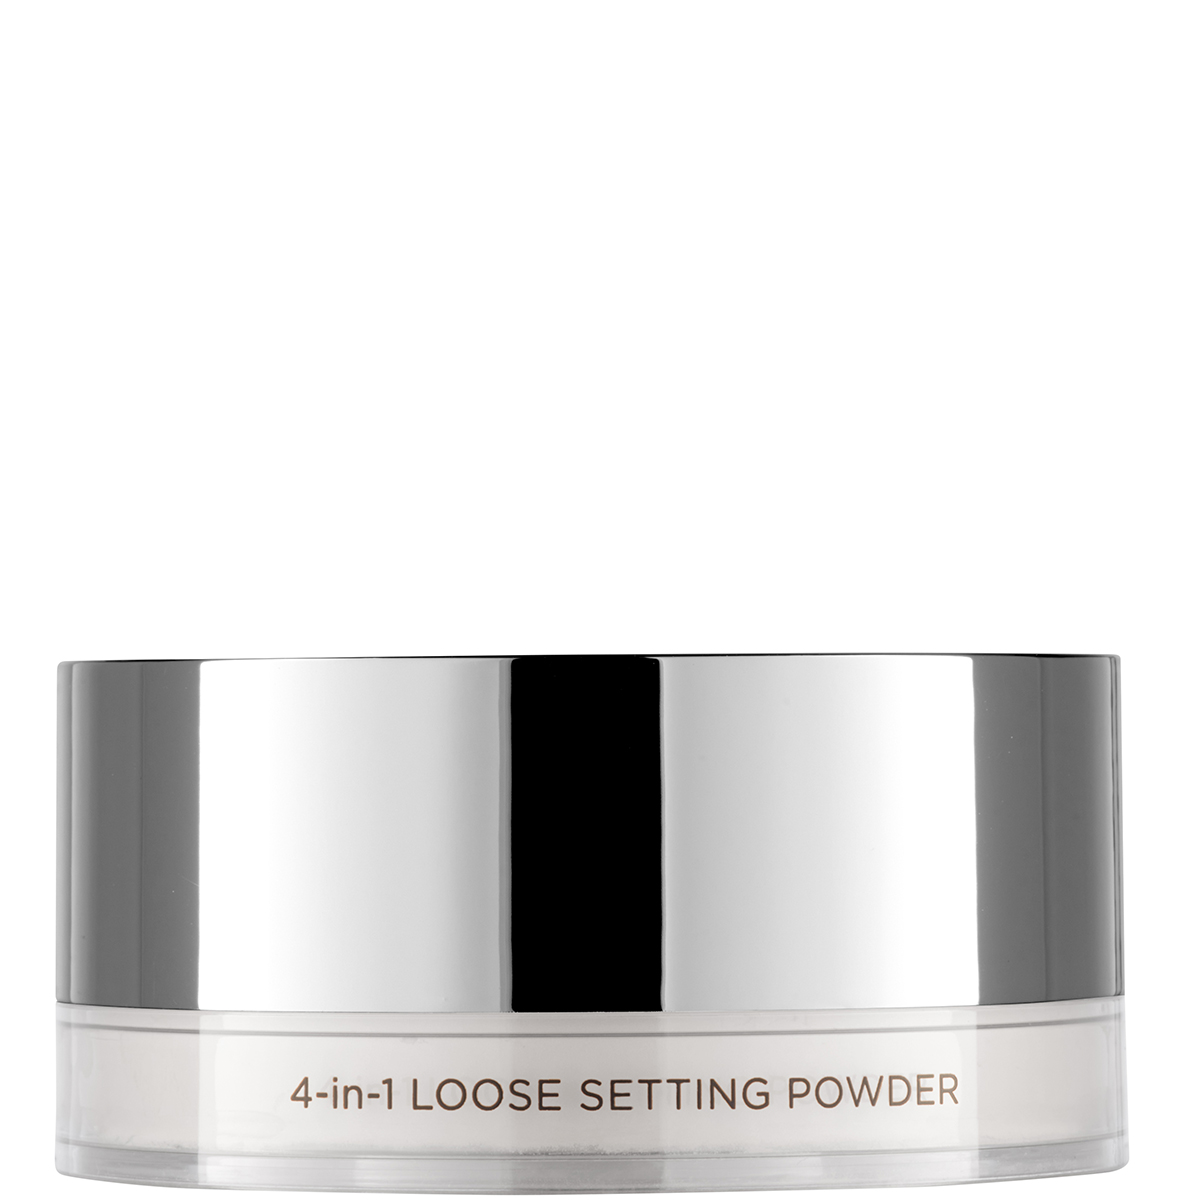 Pur 4-in-1 Loose Setting Powder Translucent